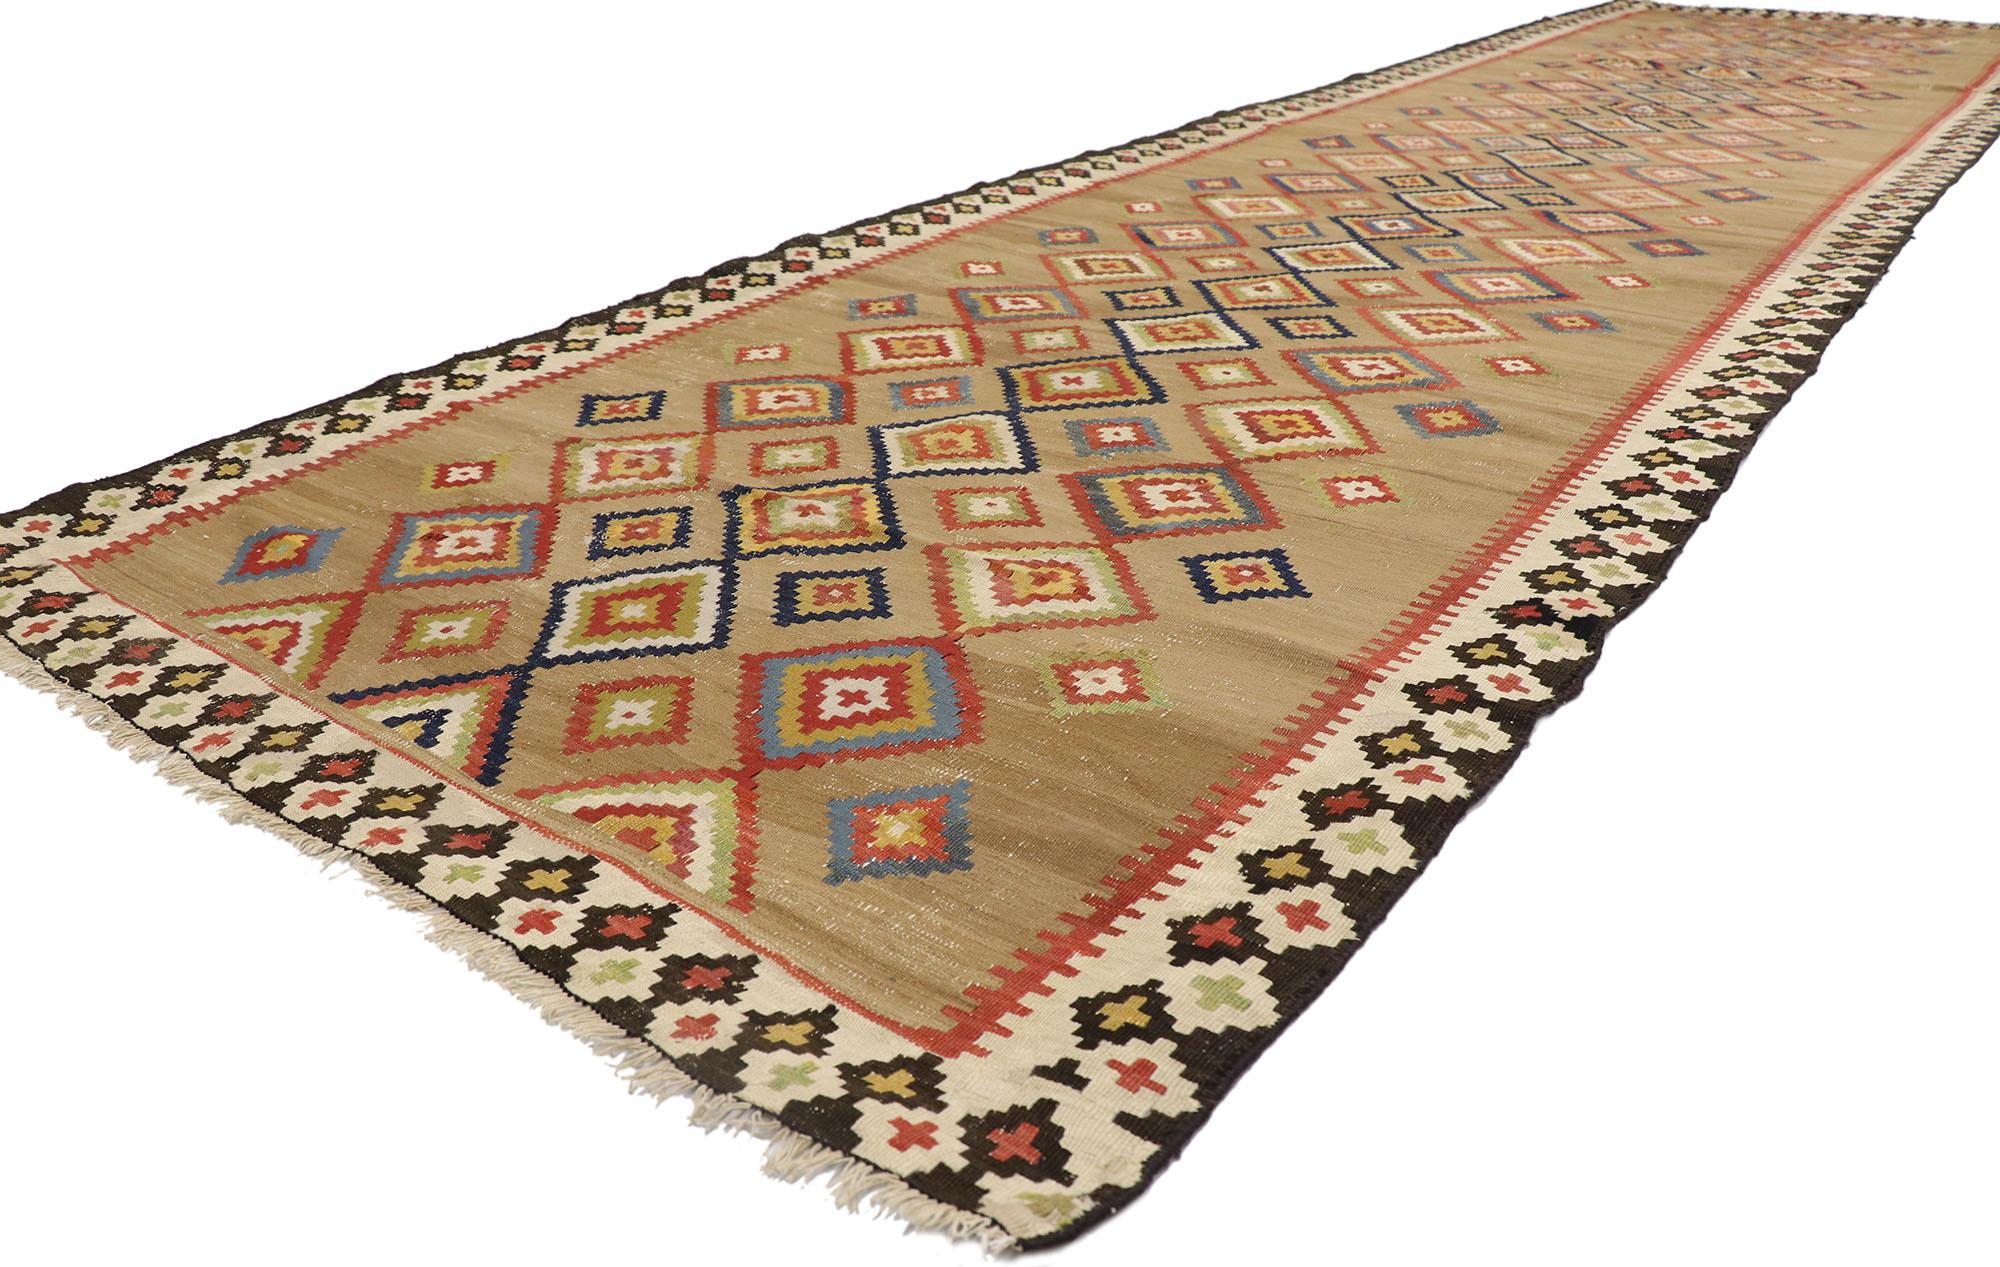 78016 Vintage Turkish Kilim Rug, 04'02 x 15'00.

​Step into a realm of warmth and invitation, where intricate detail and textured elegance converge in this handwoven wool vintage Turkish kilim rug—a captivating embodiment of woven beauty. The